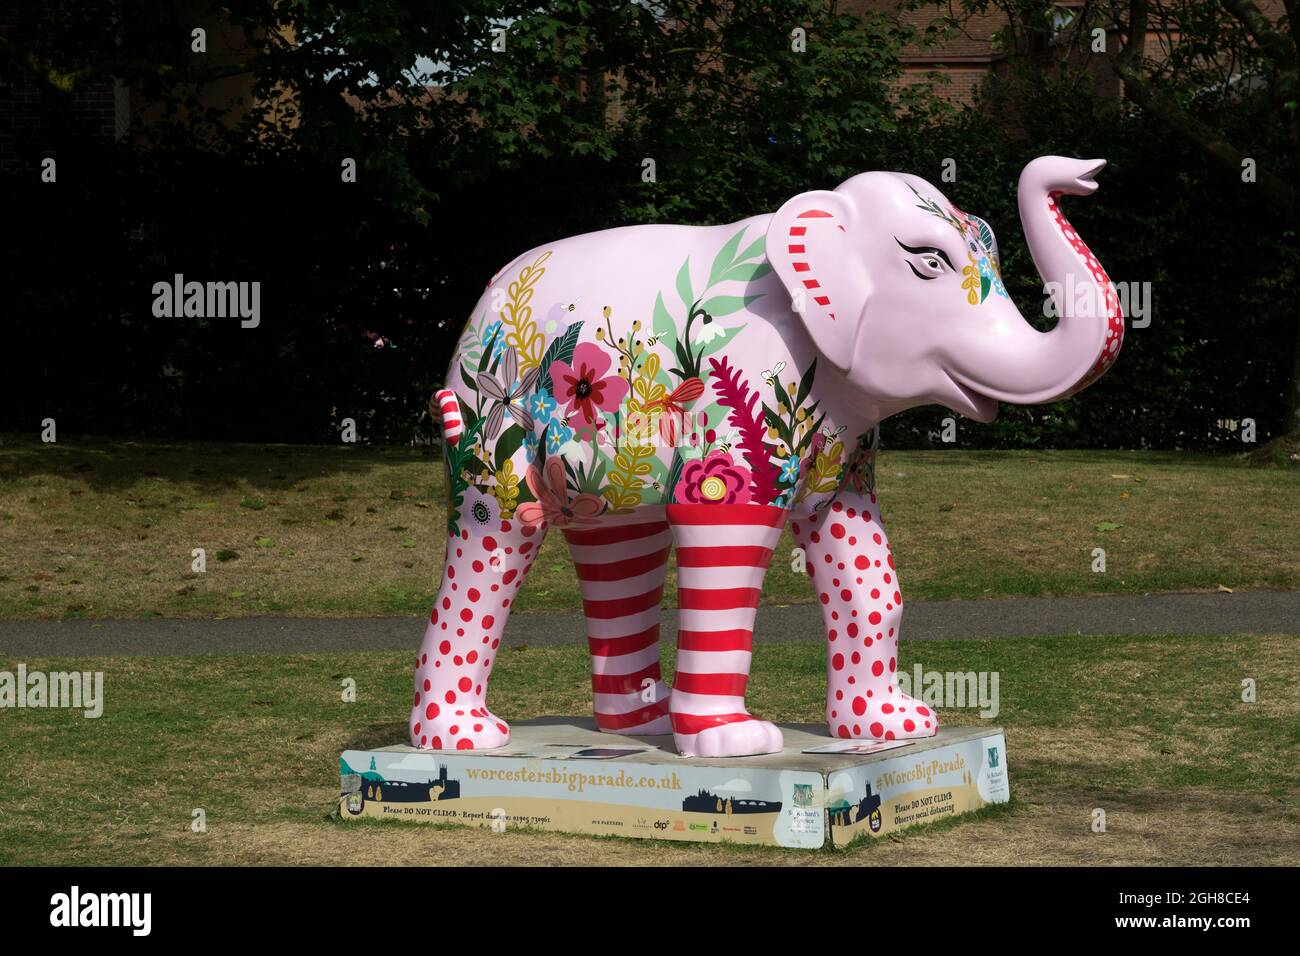 A decorated elephant as part of The Big Parade in Worcester city centre, UK. 2021. Stock Photo